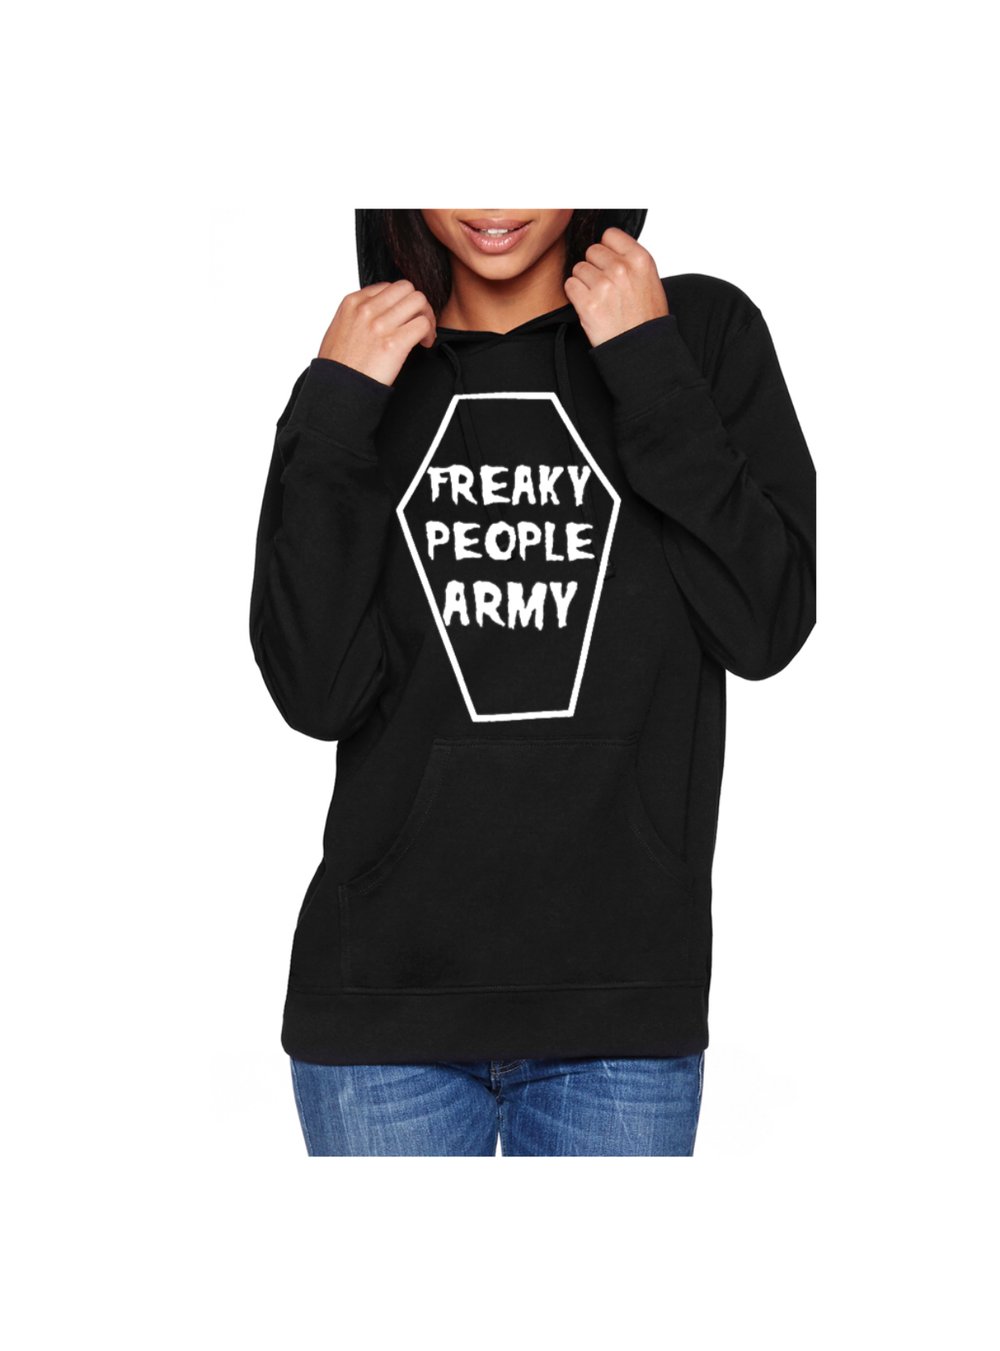 Freaky People Army Unisex Pullover